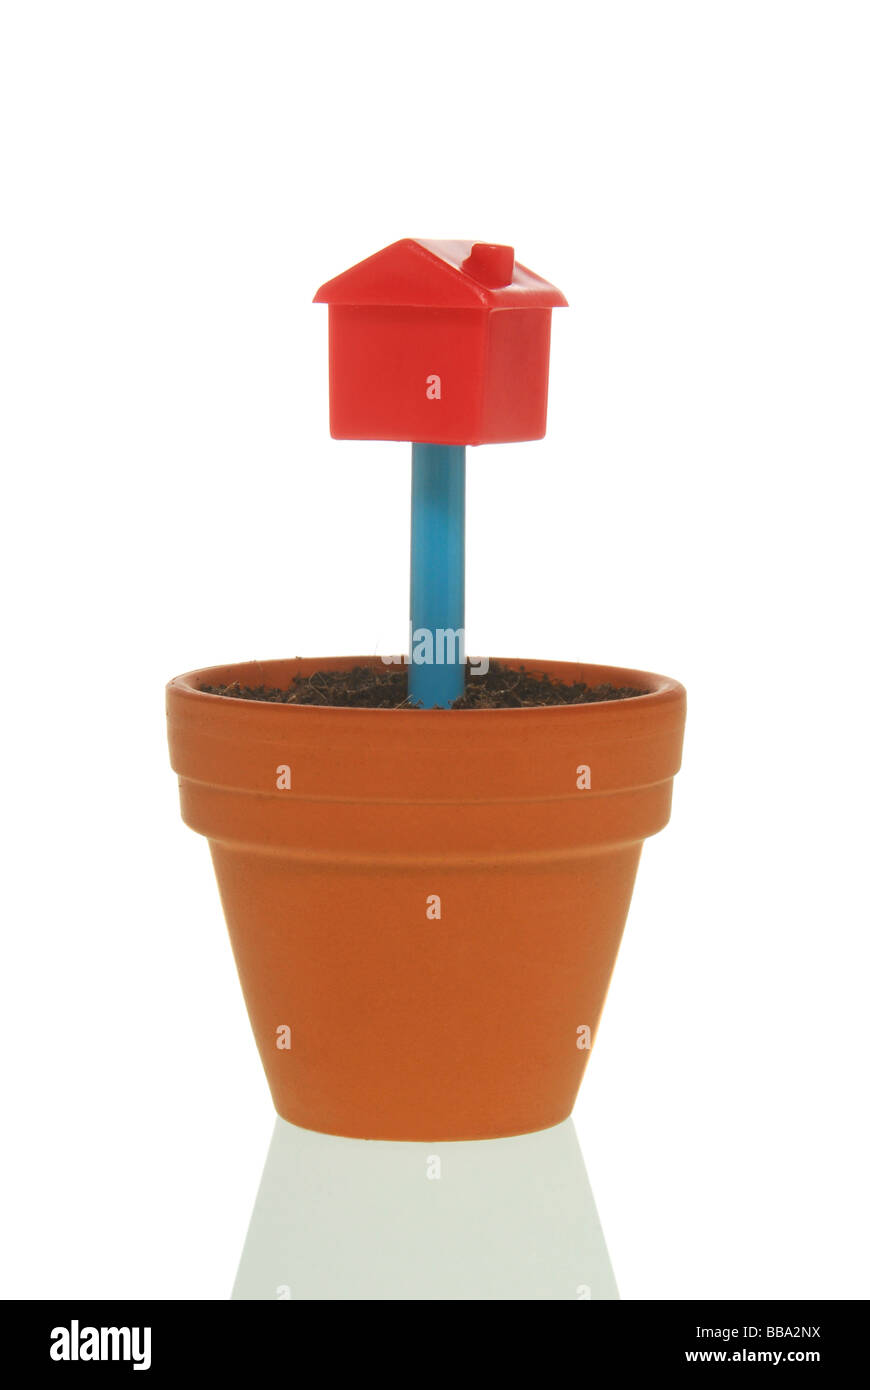 Flowerpot with a model of a house, symbolic image for real estate, growth Stock Photo